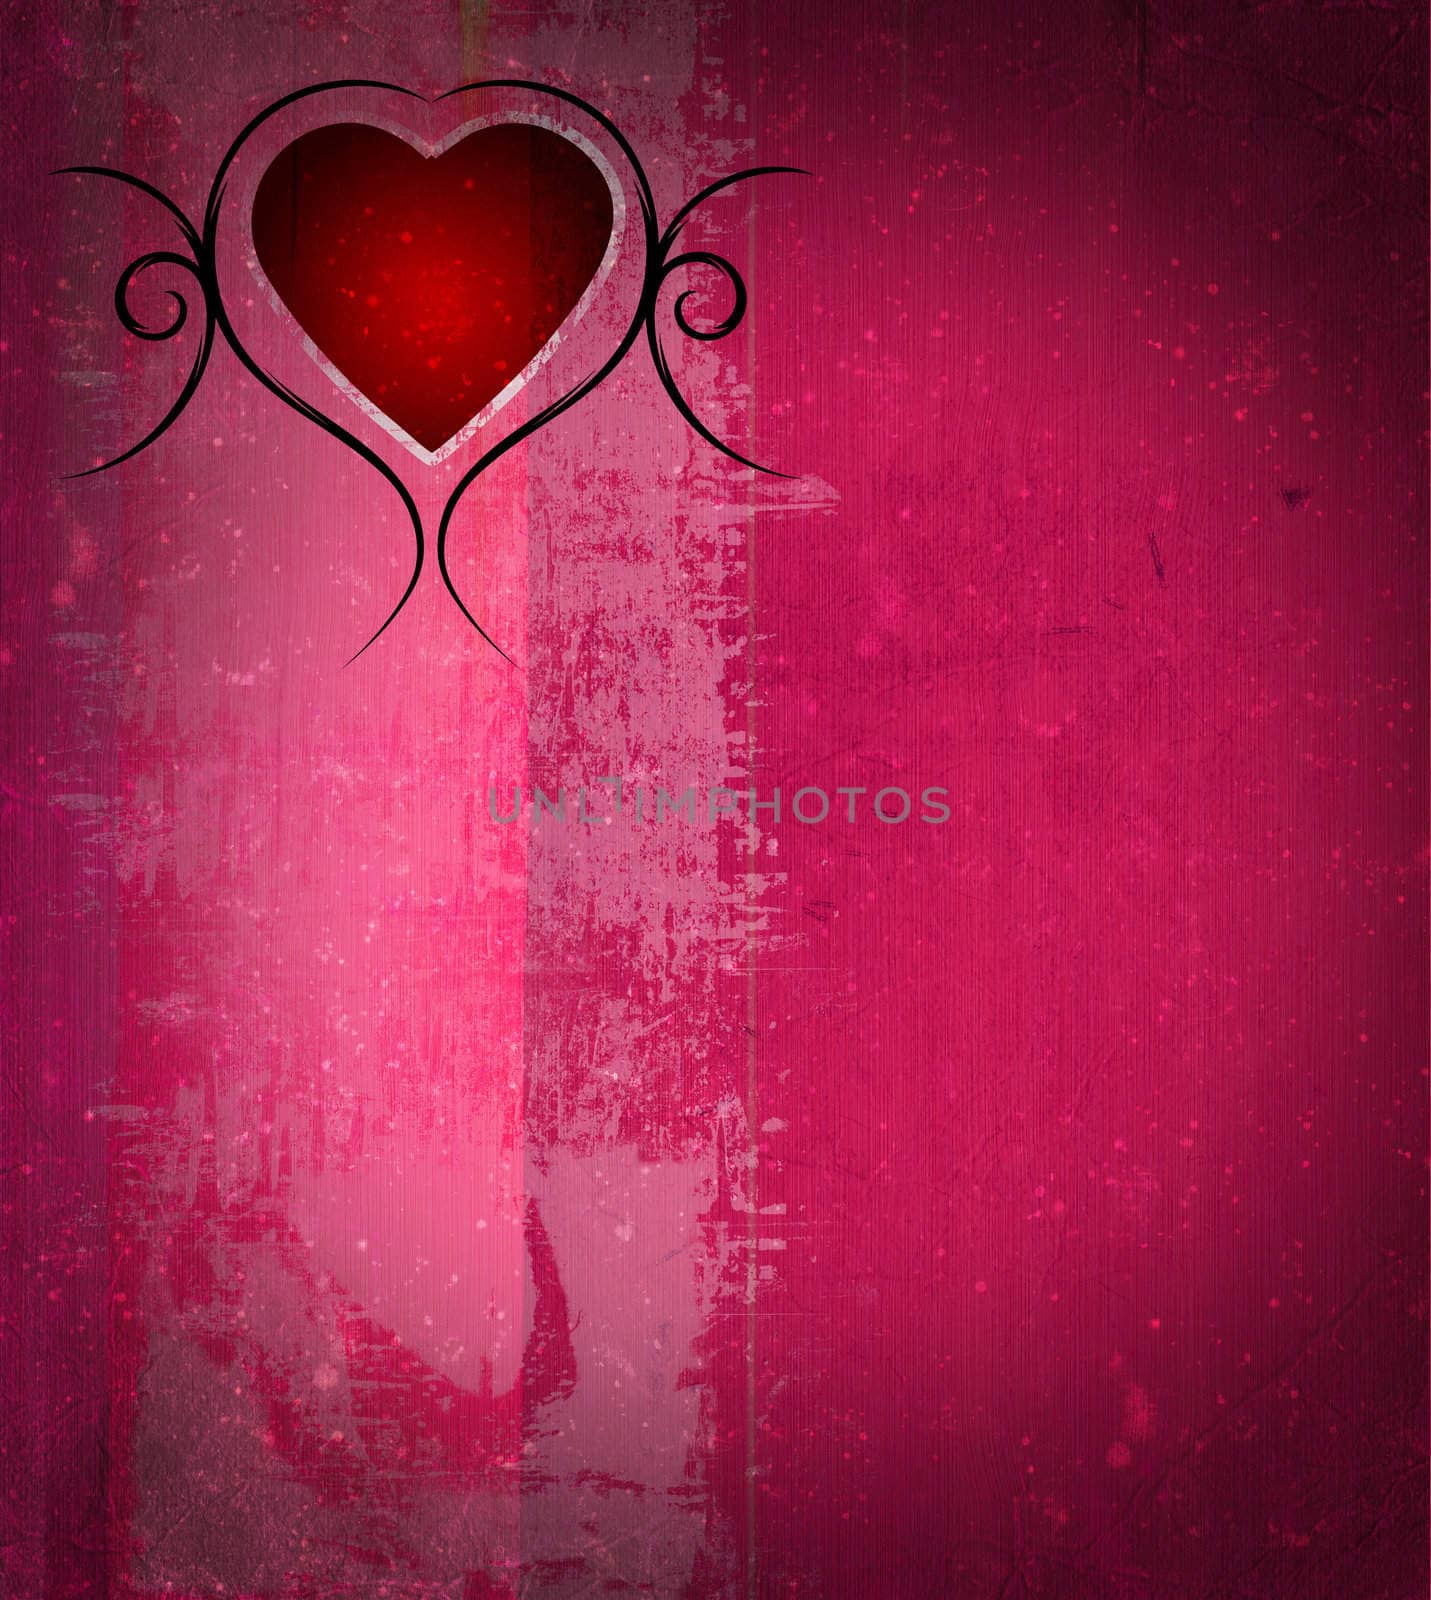 Valentines day grunge background with space for your text. More images like this in my portfolio